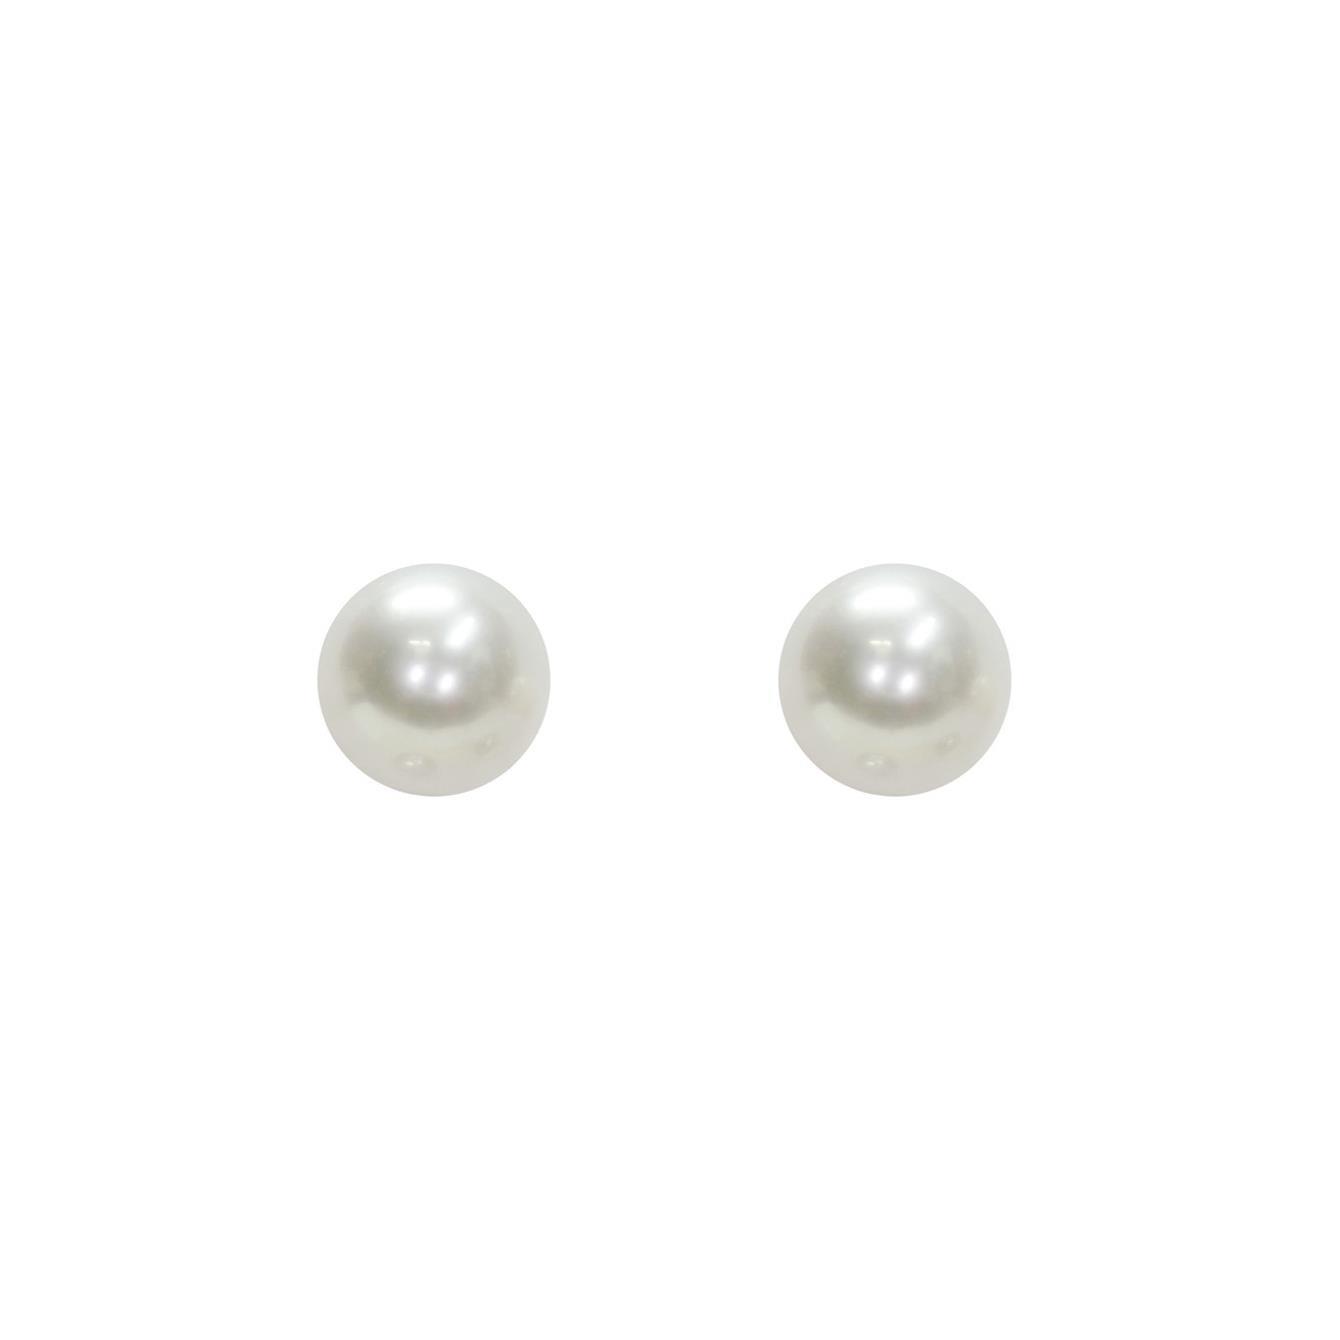 Silver earrings with full pearlescent pearl - MAYUMI